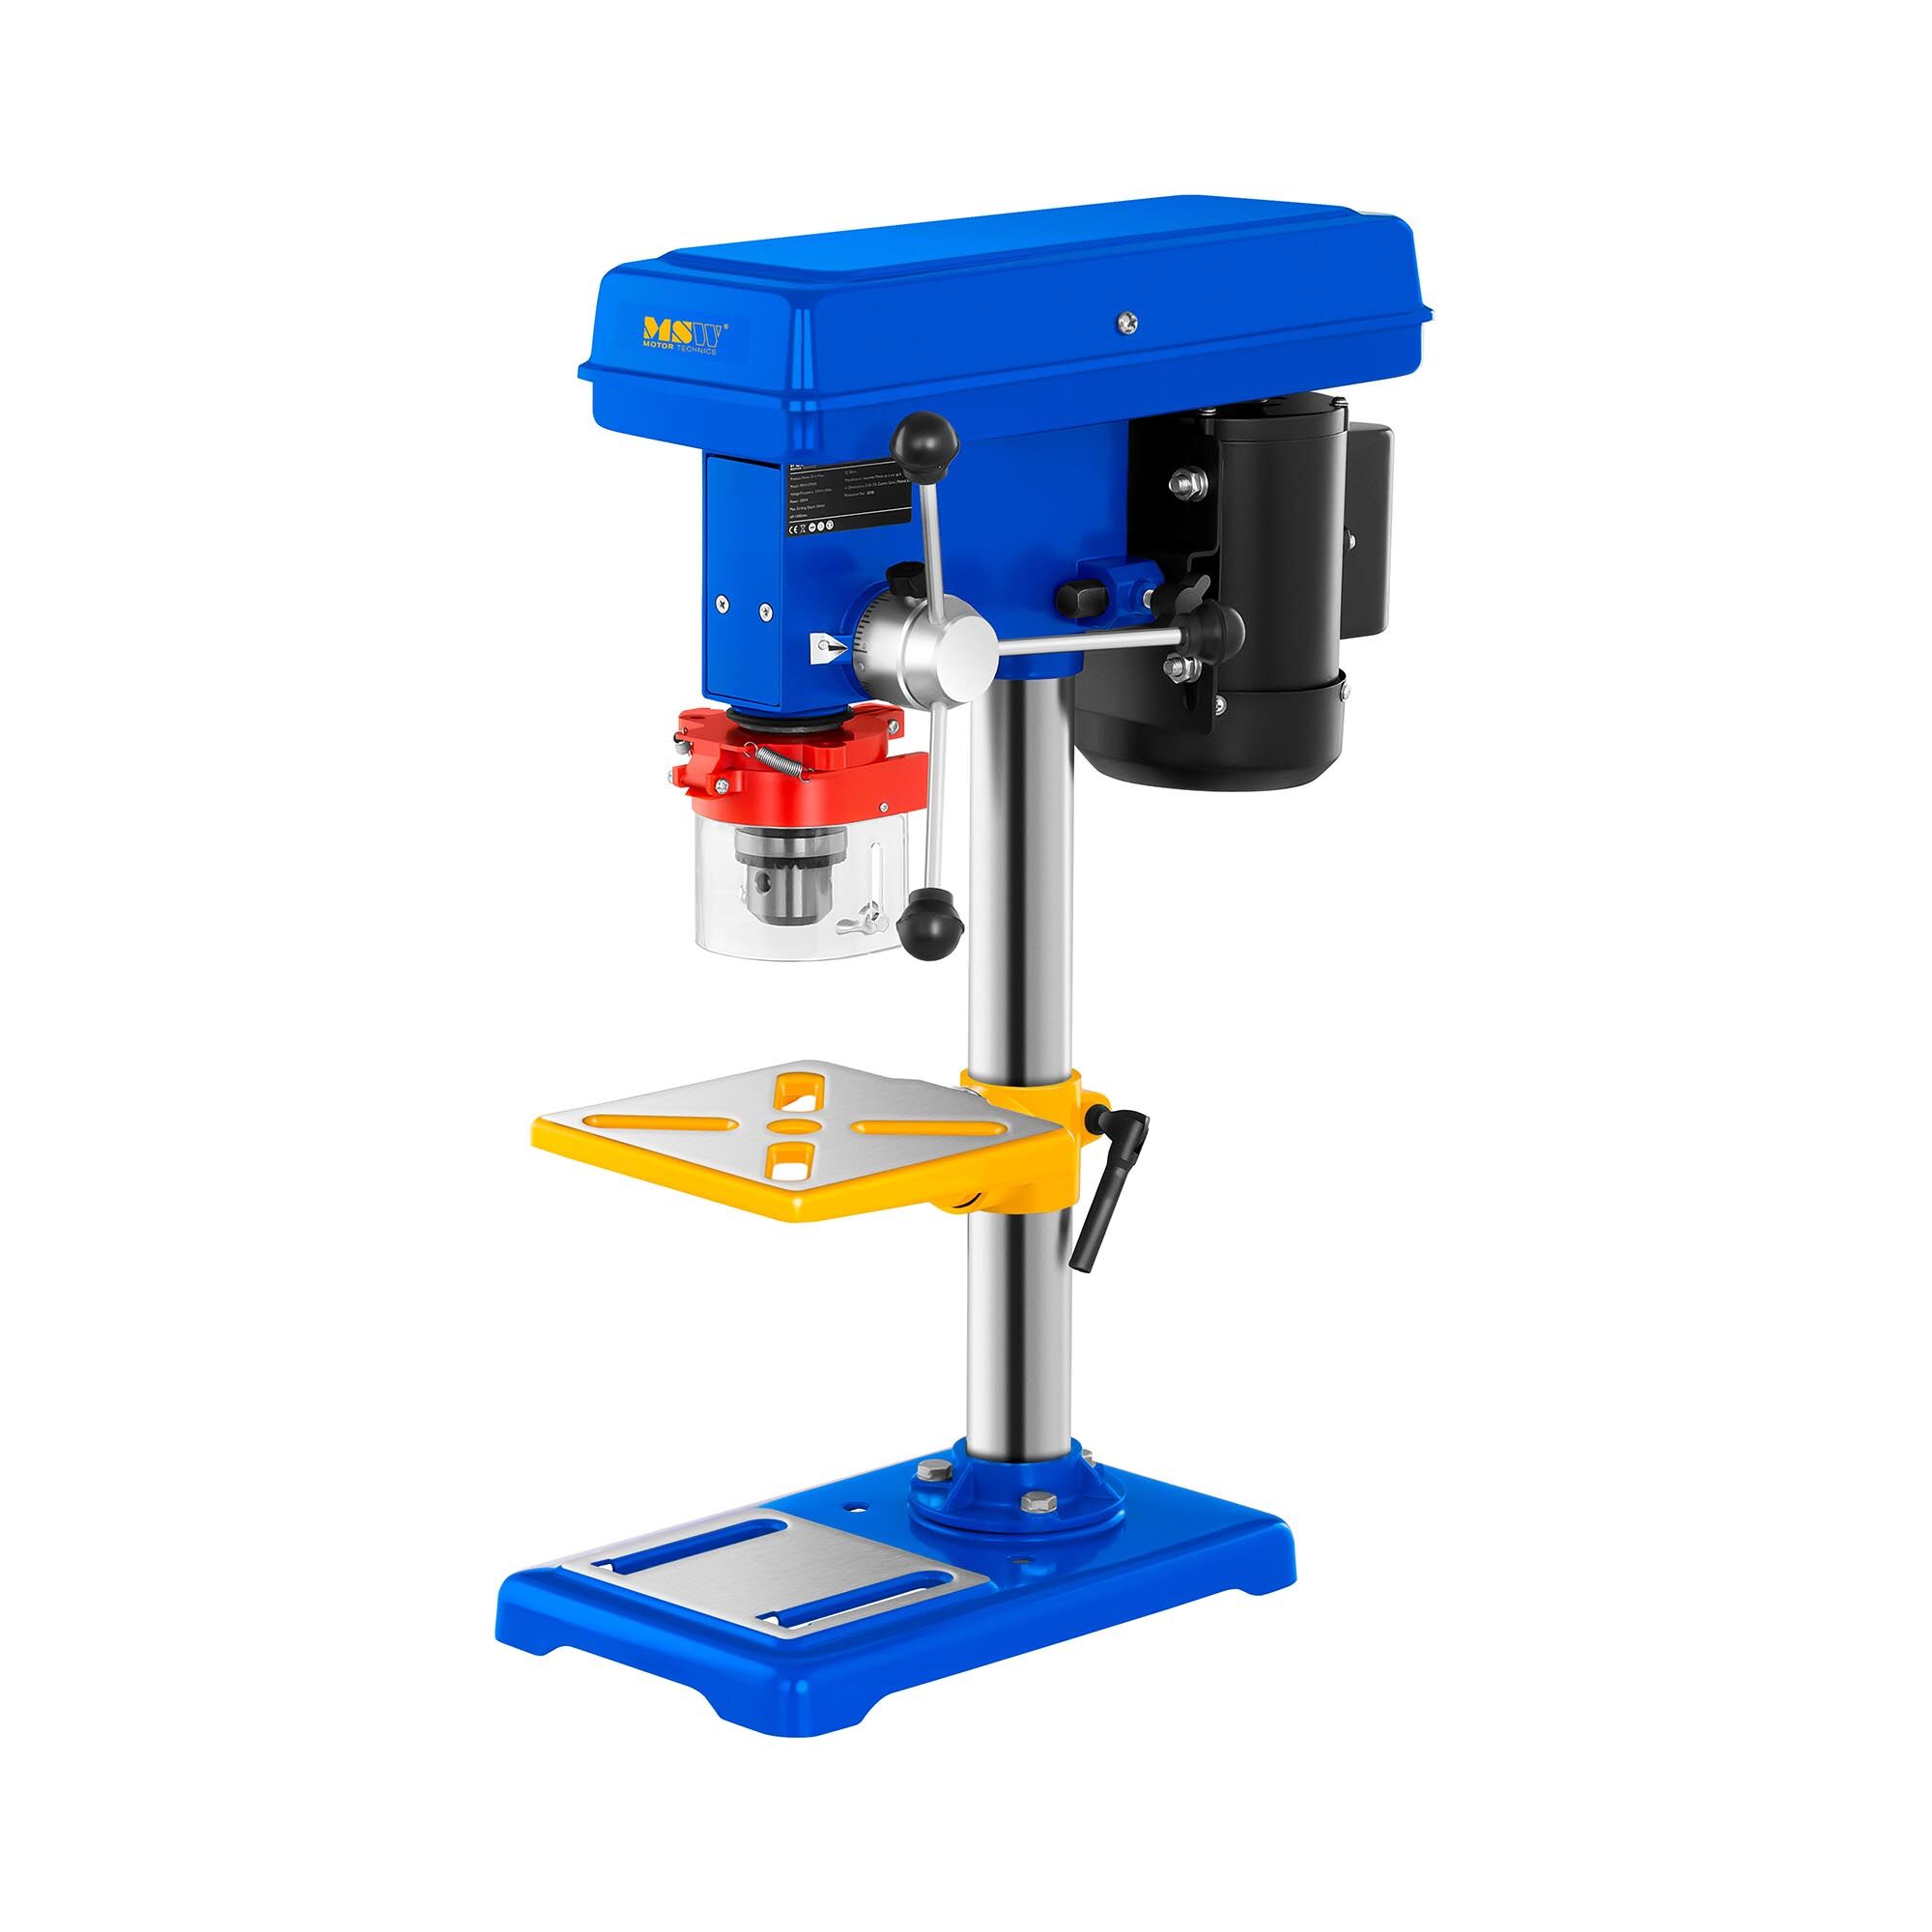 MSW Benchtop Drill Press - 500 W - 9 Power Levels